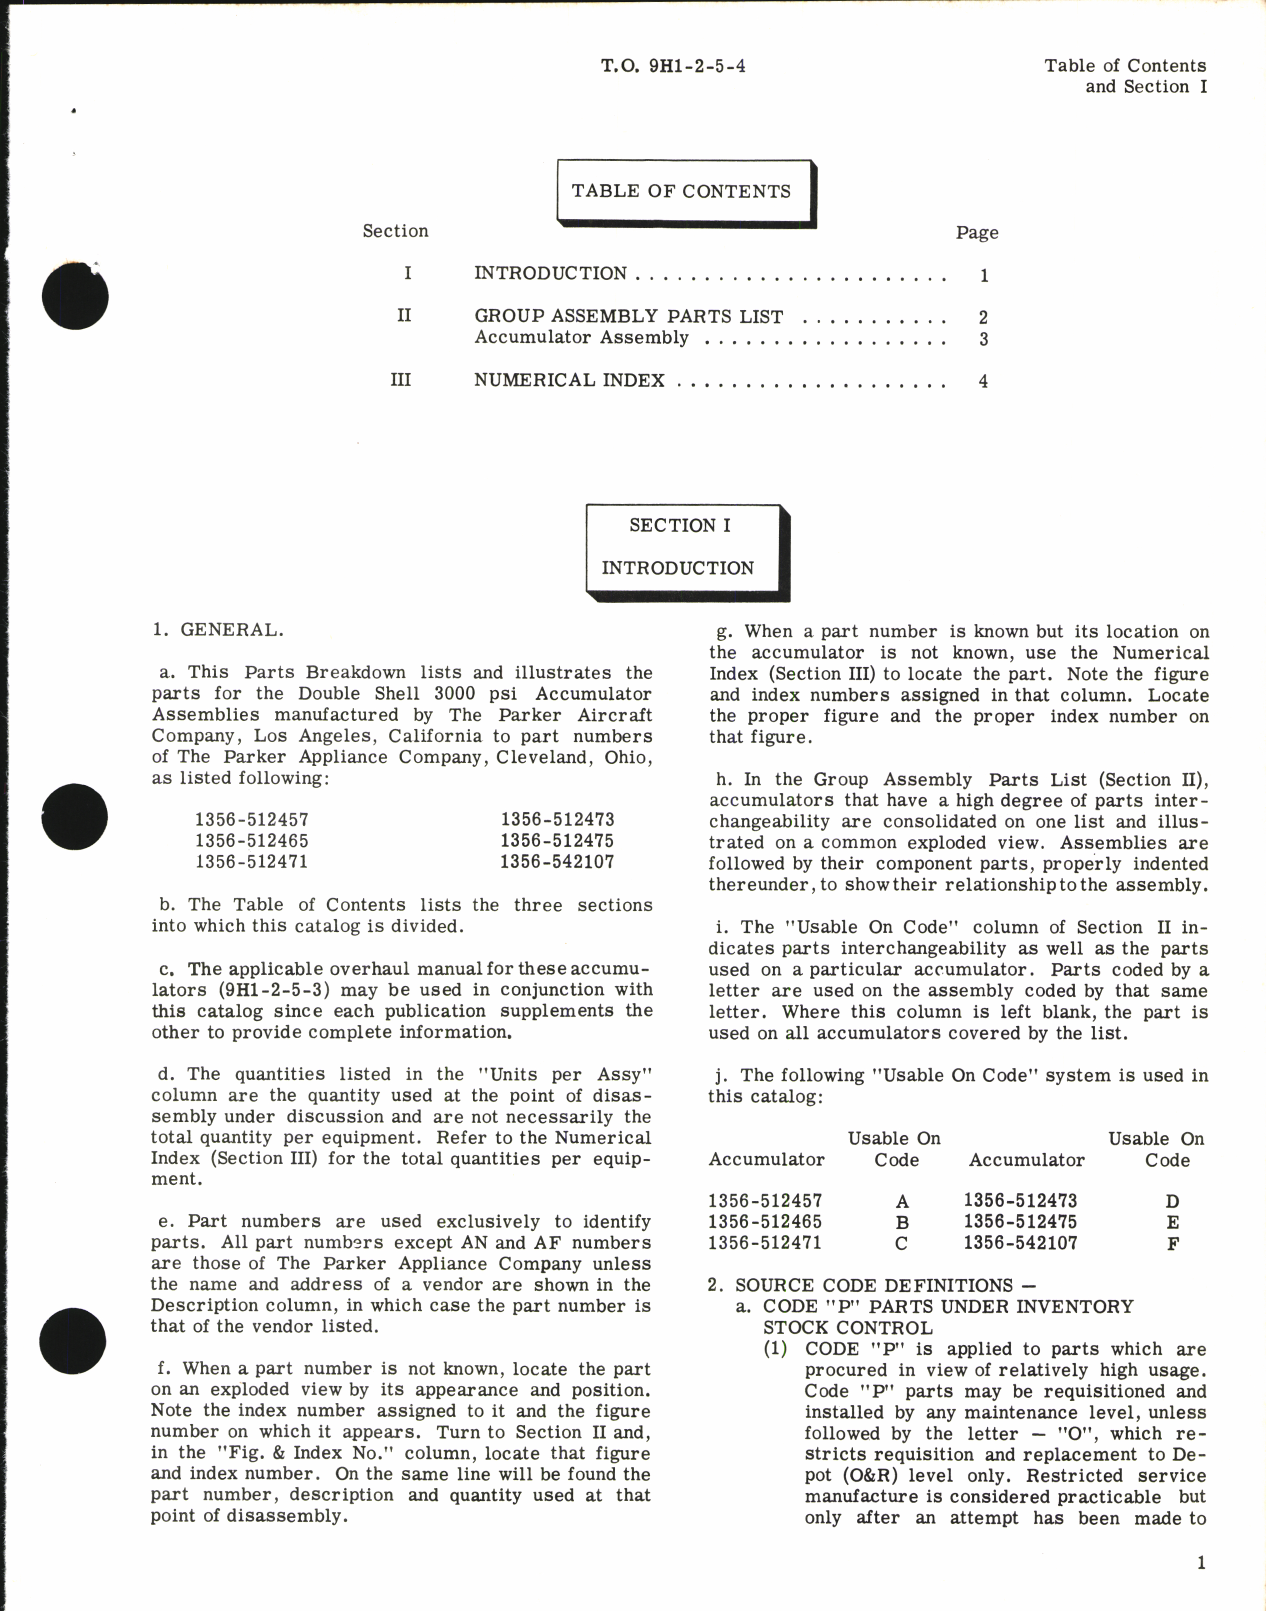 Sample page 3 from AirCorps Library document: Illustrated Parts Breakdown for Accumulator Assemblies